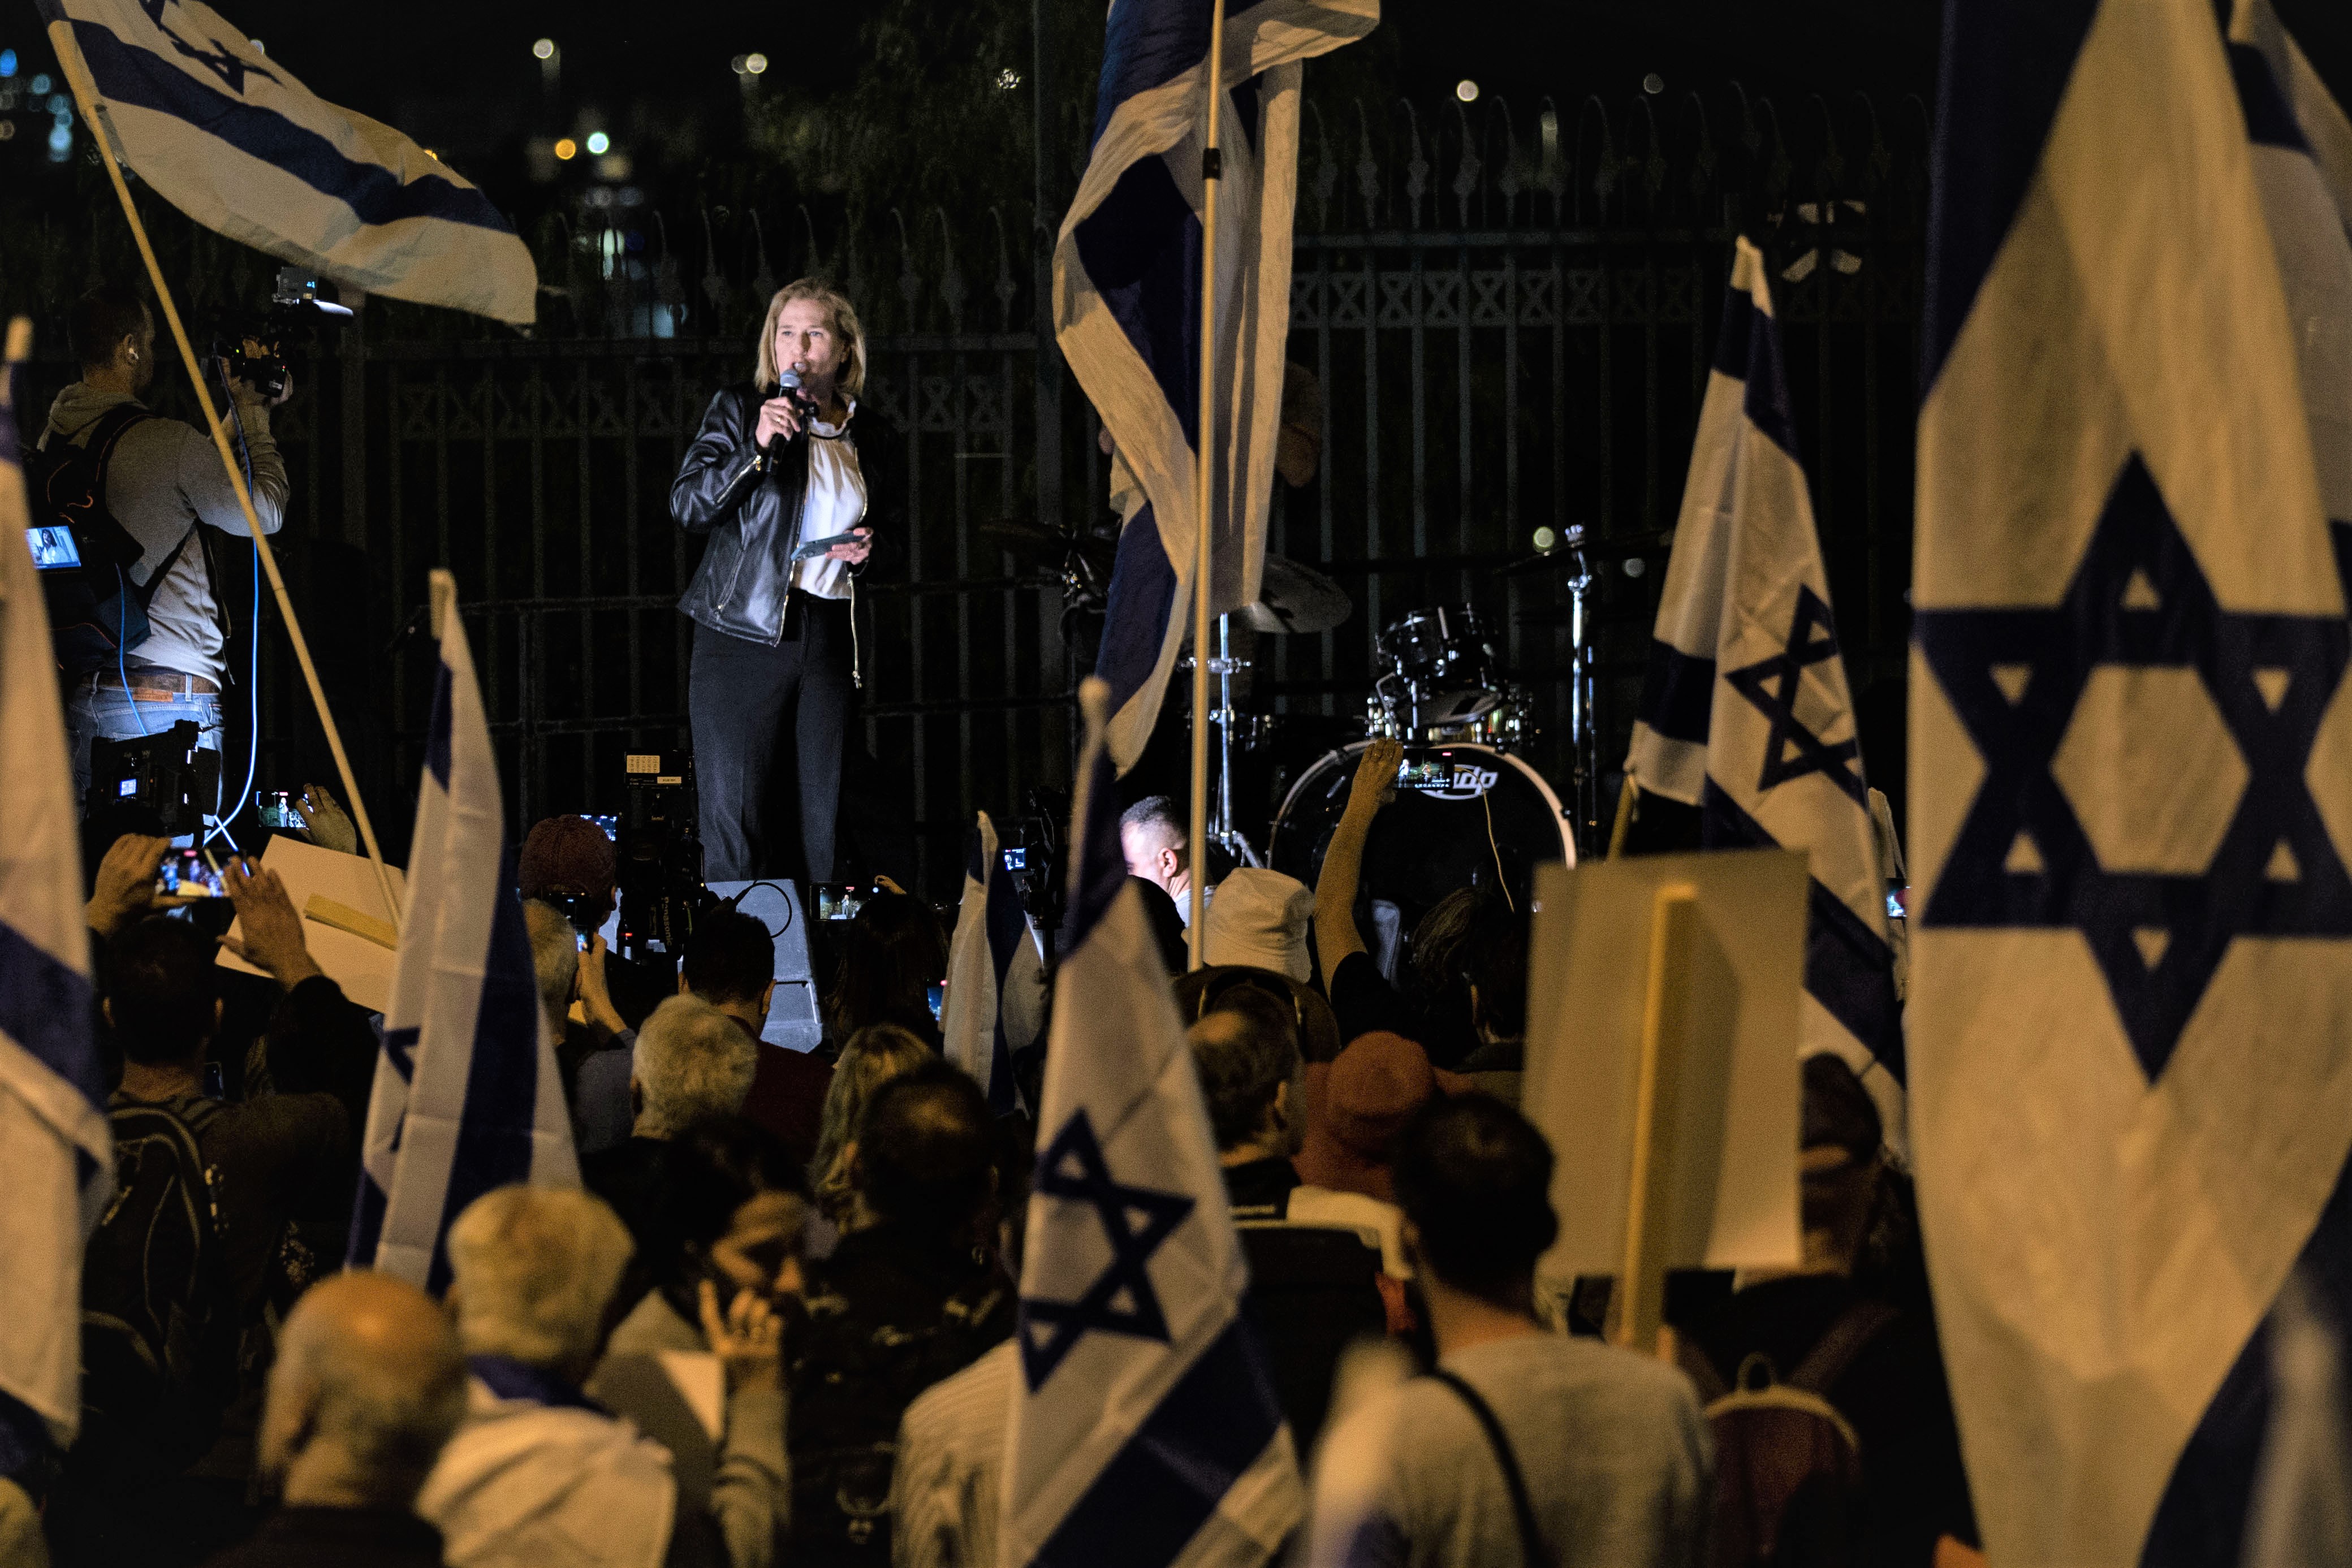 Former Israeli Foreign Minister Tzipi Livni speaks during a protest against the Prime Minister Benjamin Netanyahu's judiciary overhaul in front of the Israeli prime ministry office in Jerusalem